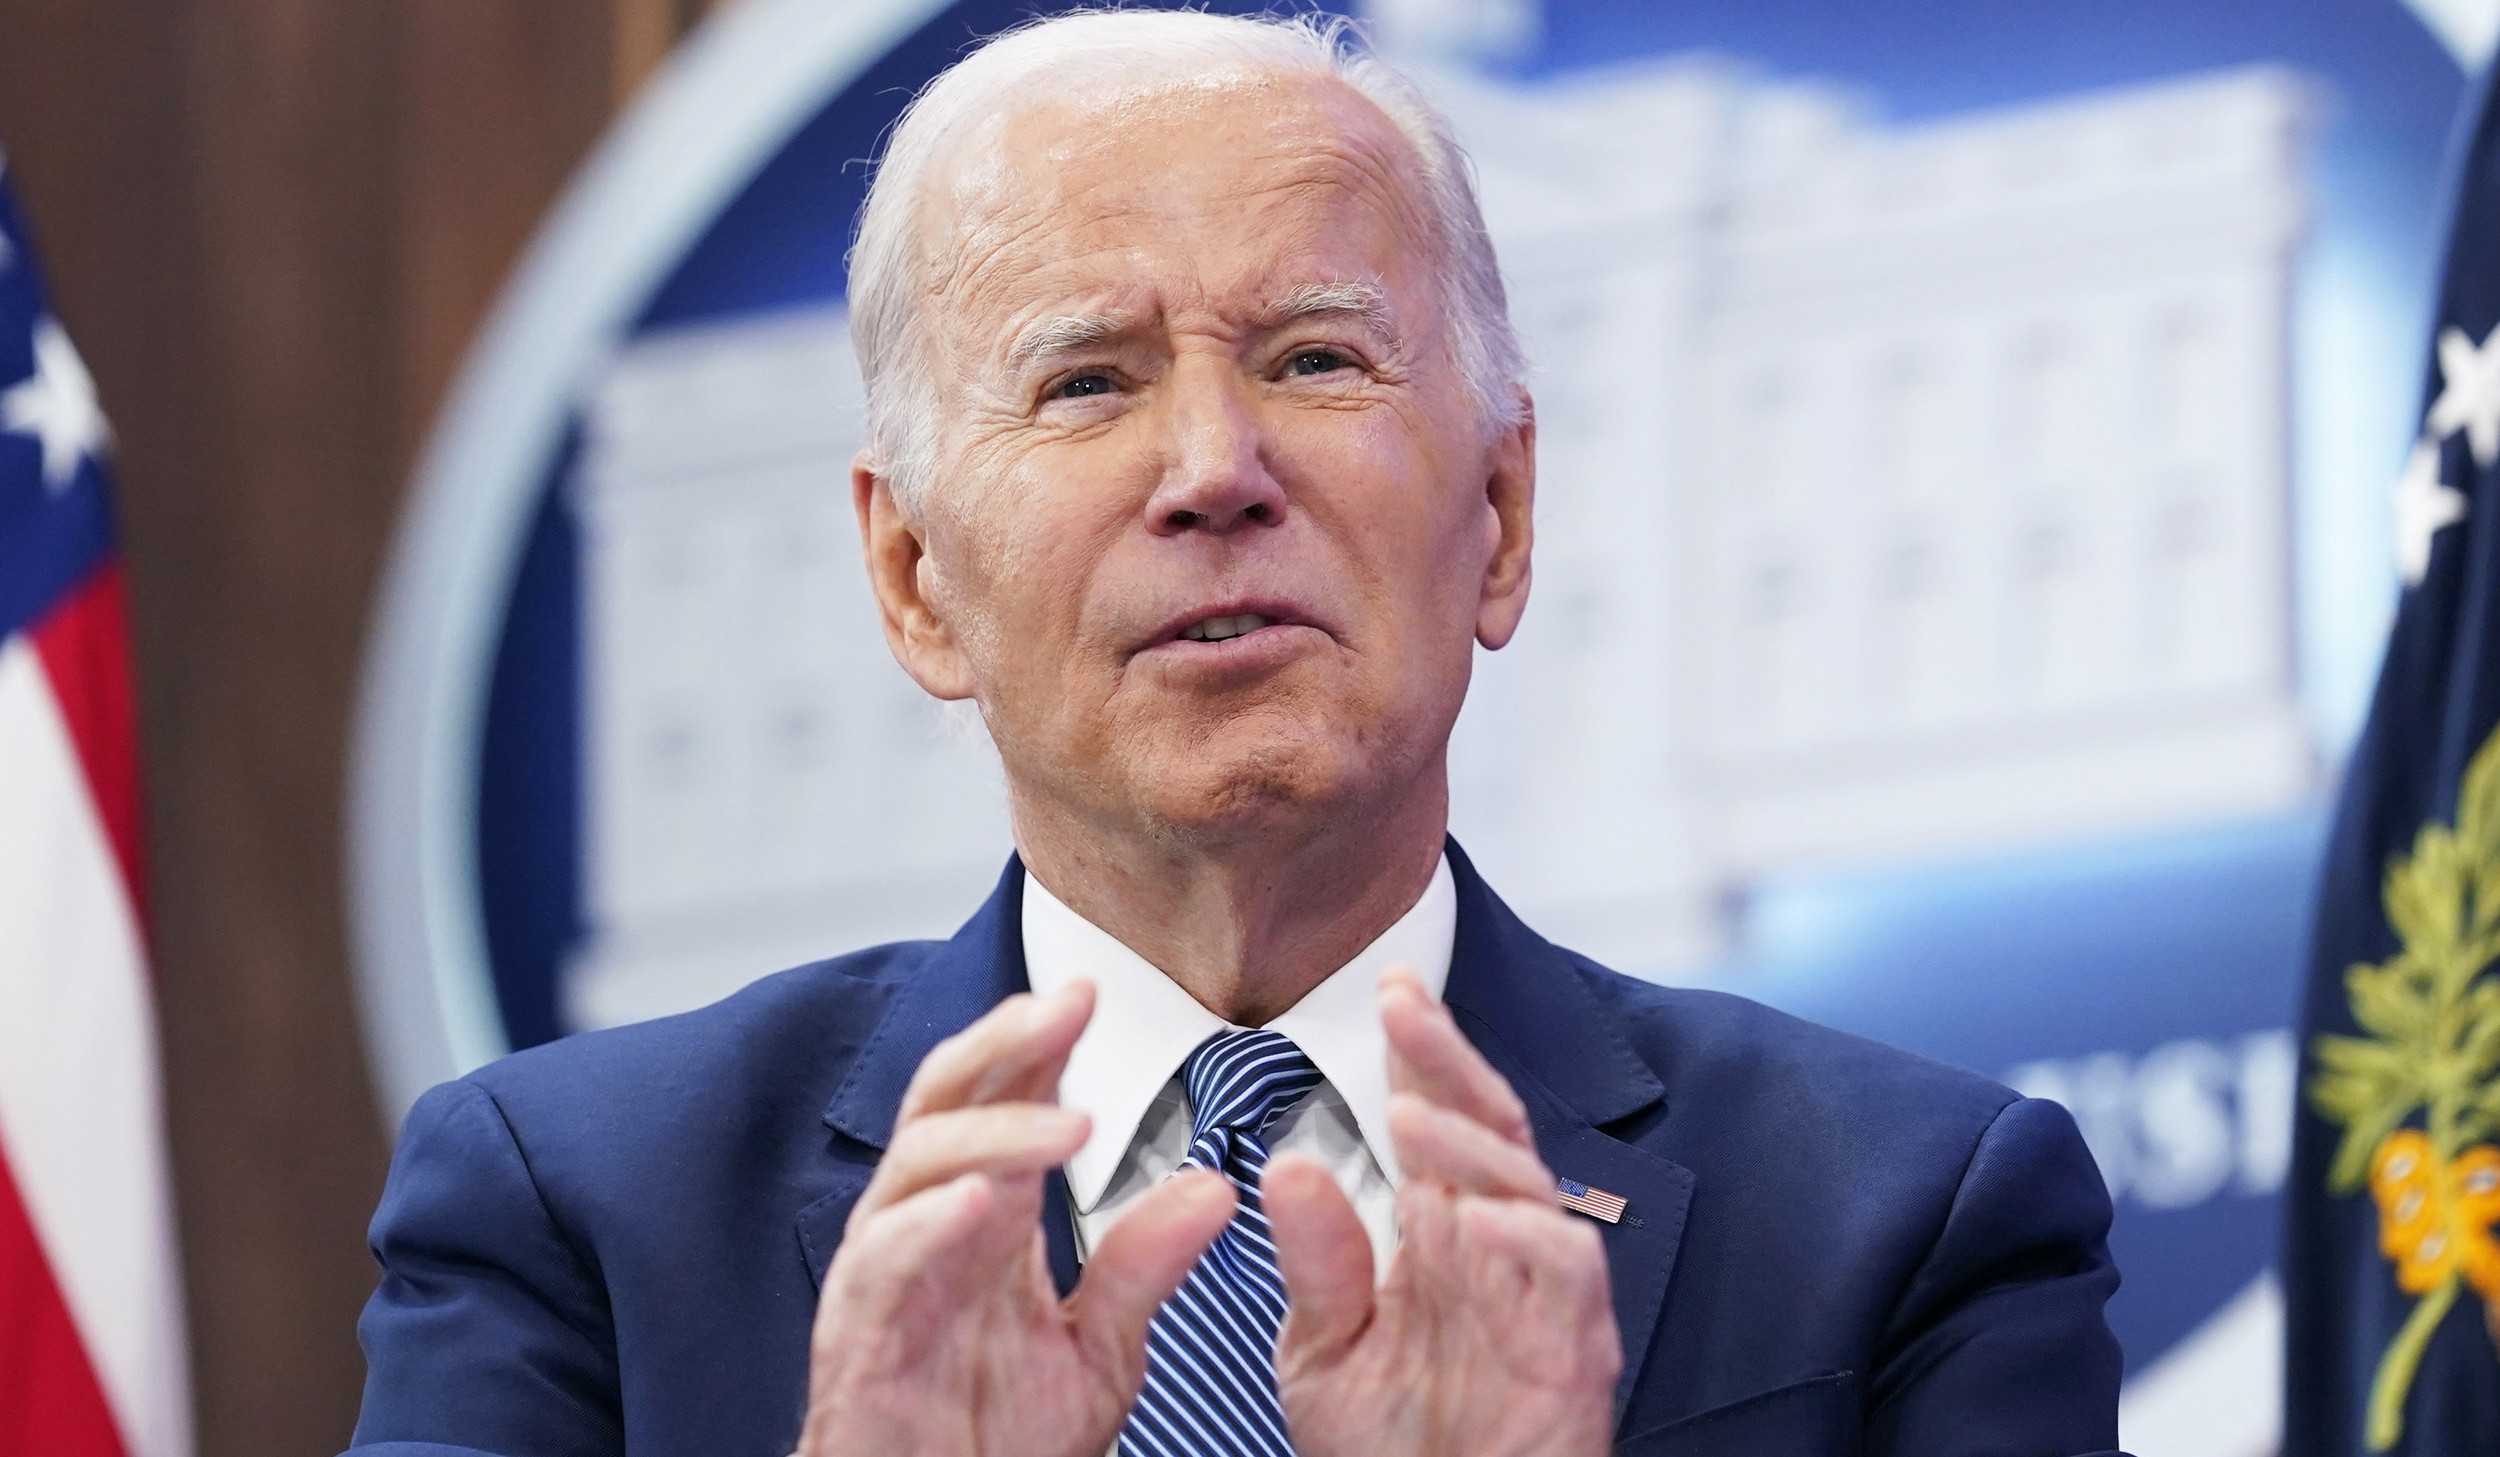 Biden set to become first octogenarian U.S. president in office